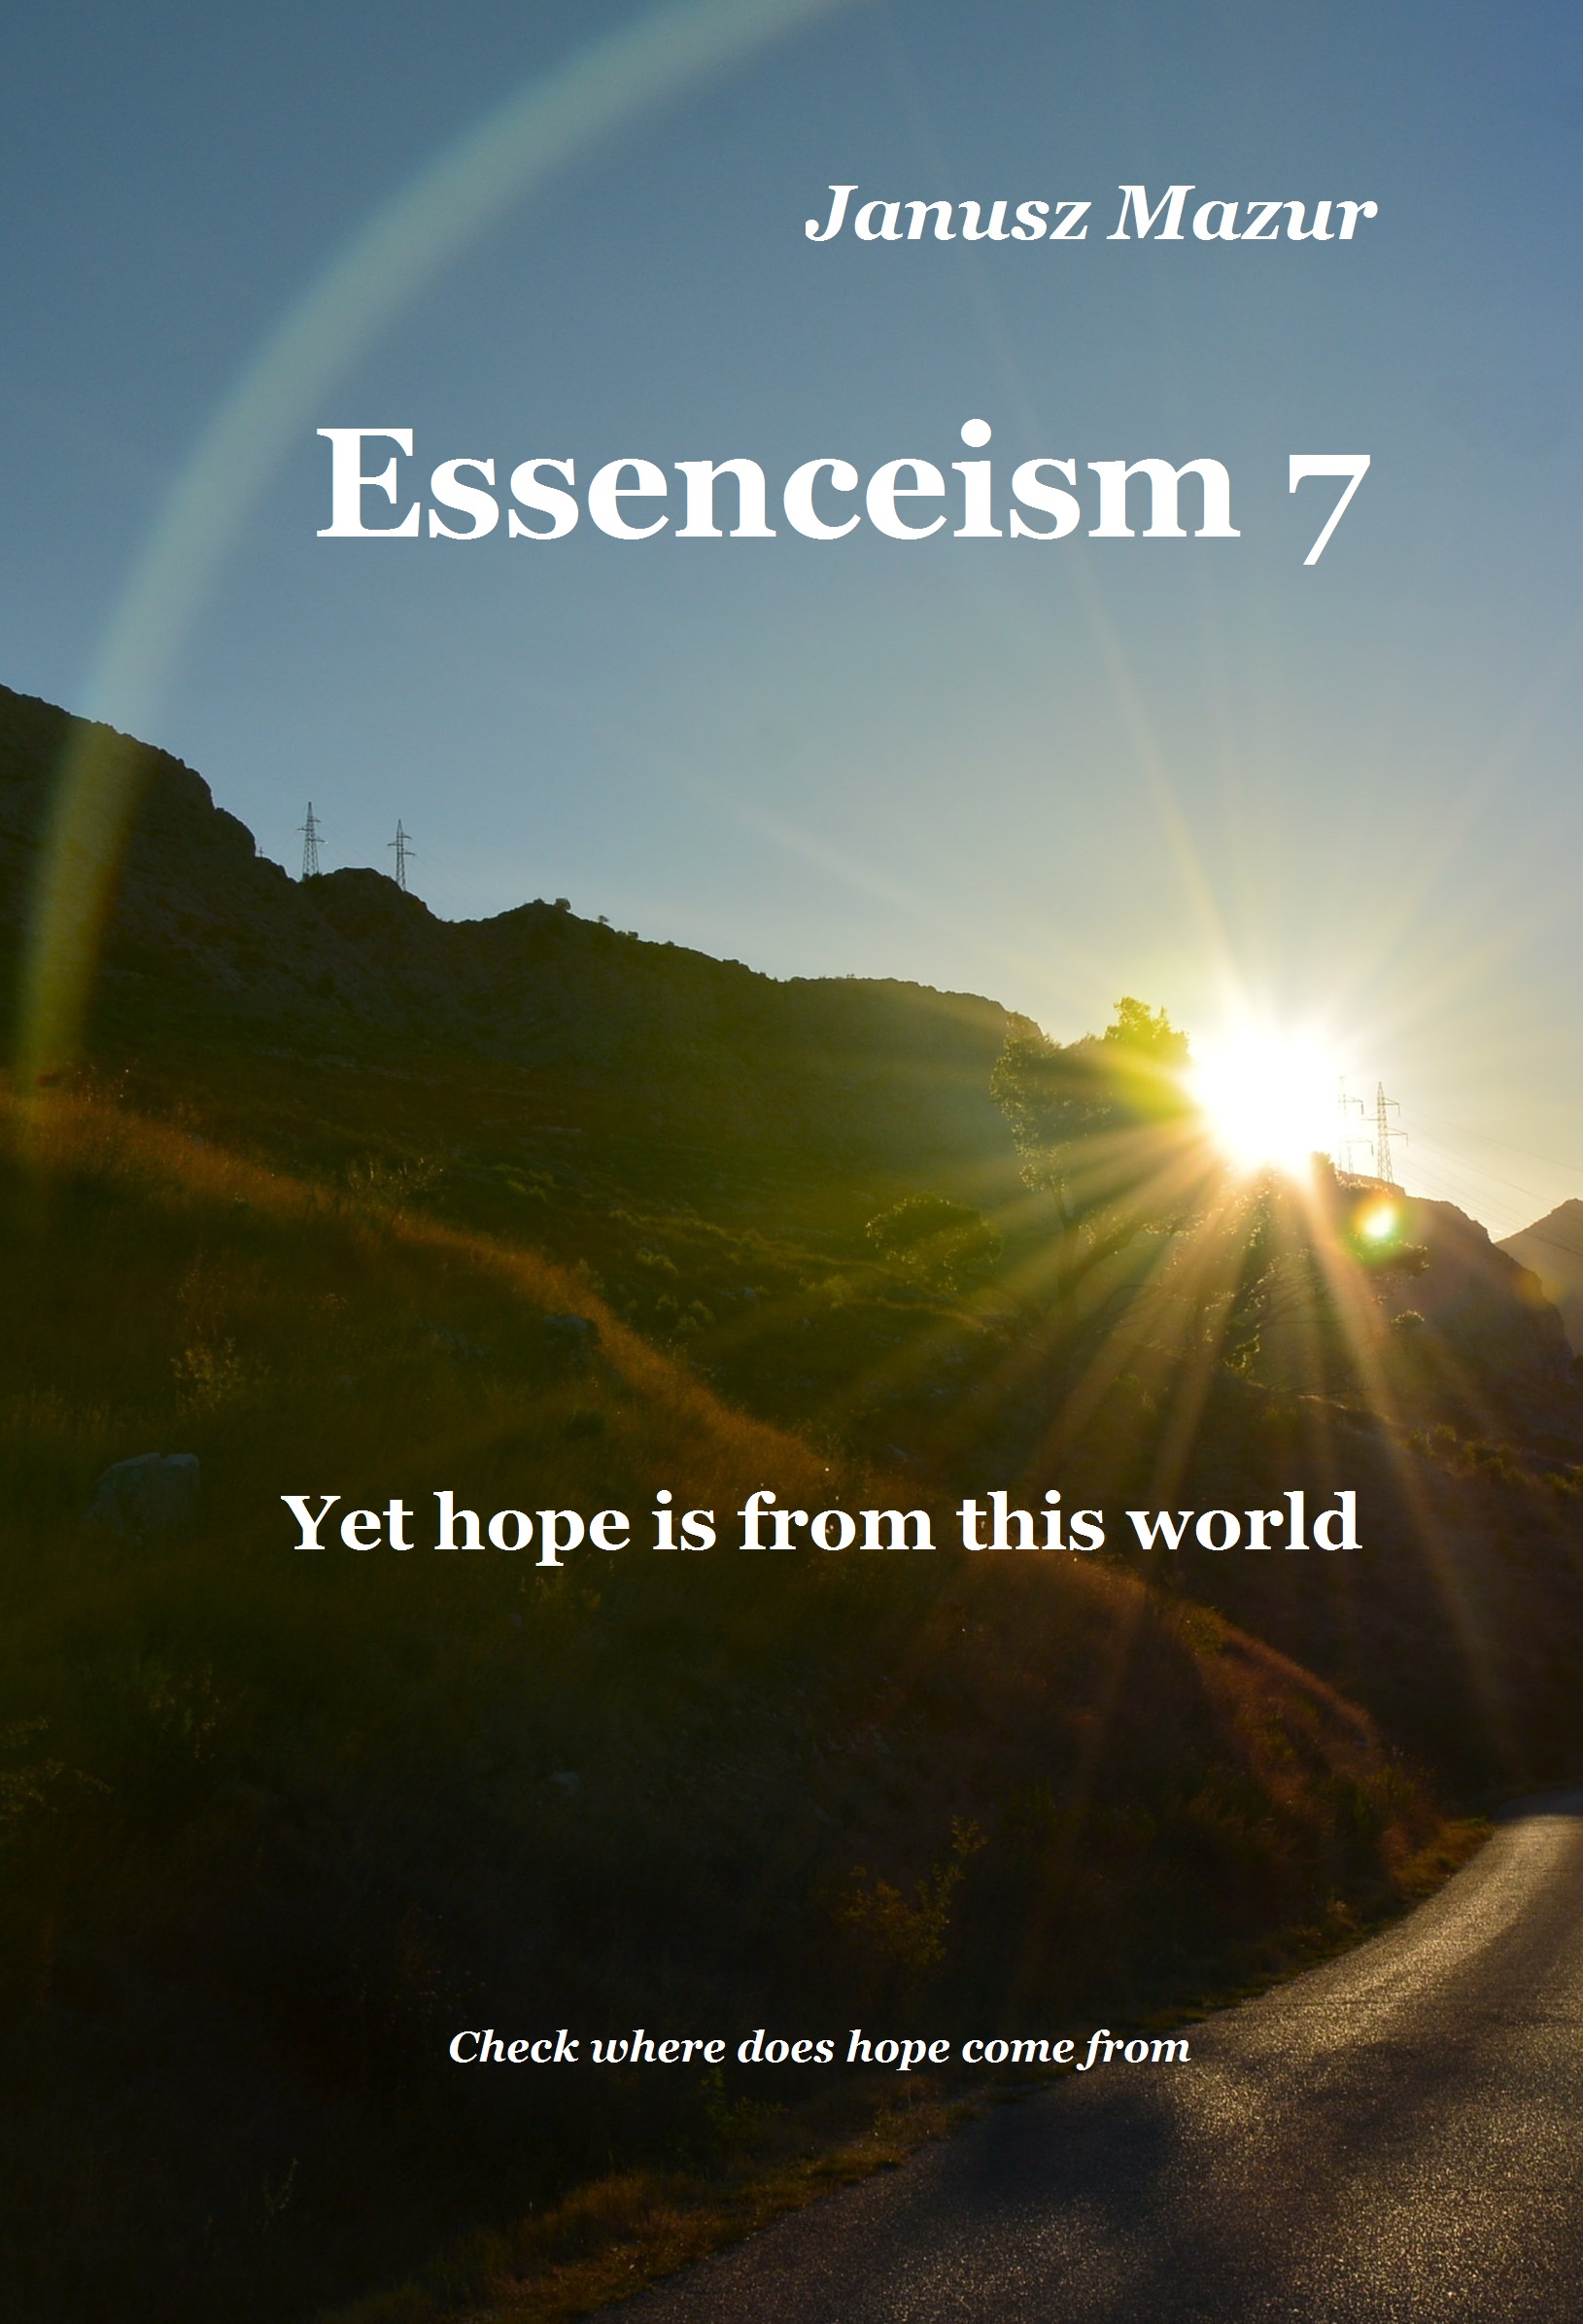 Front Cover_Essenceism 7_Yet hope is from this world